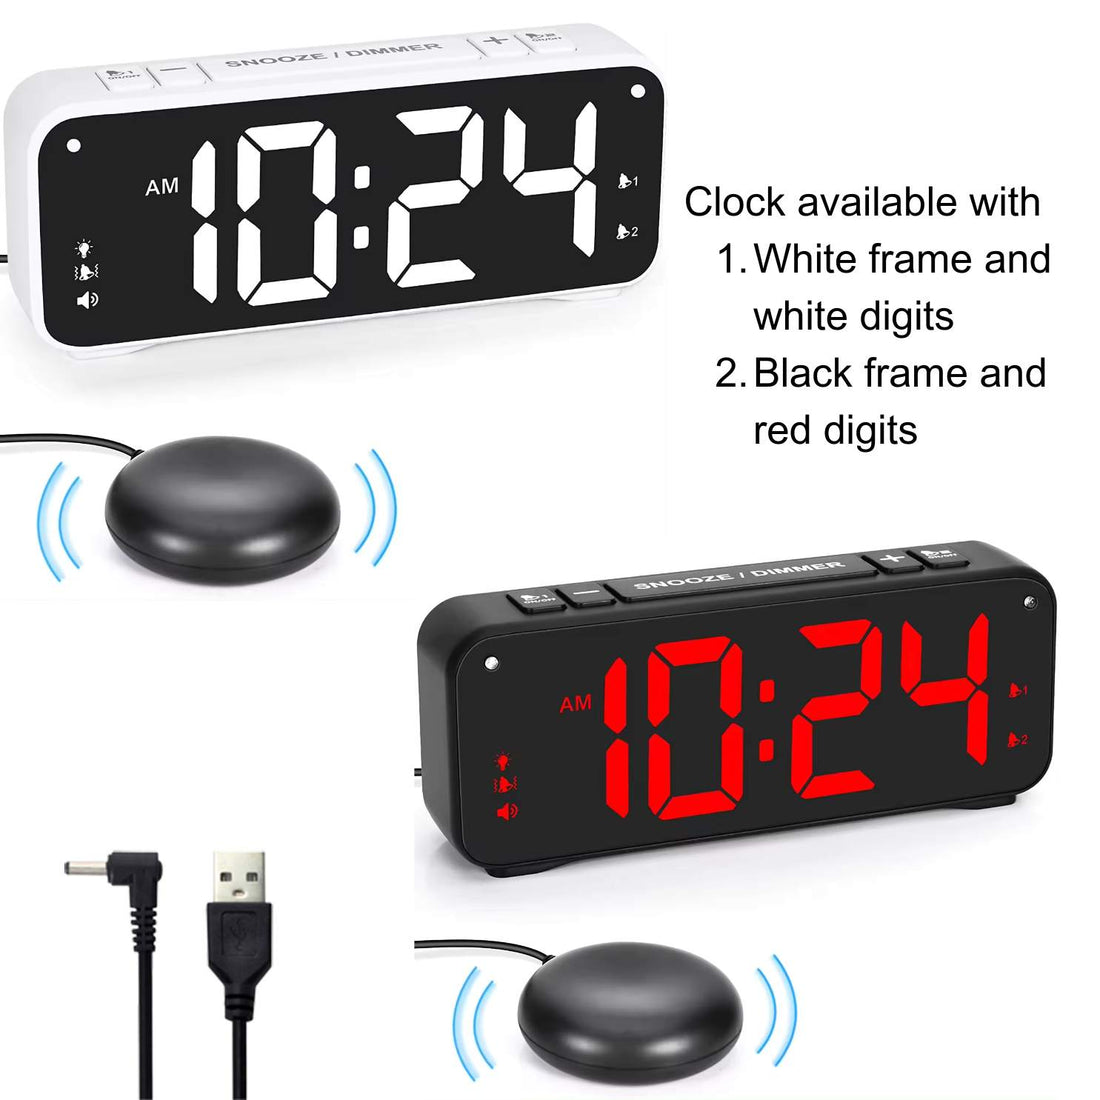 shaker alarm clock in white and black options